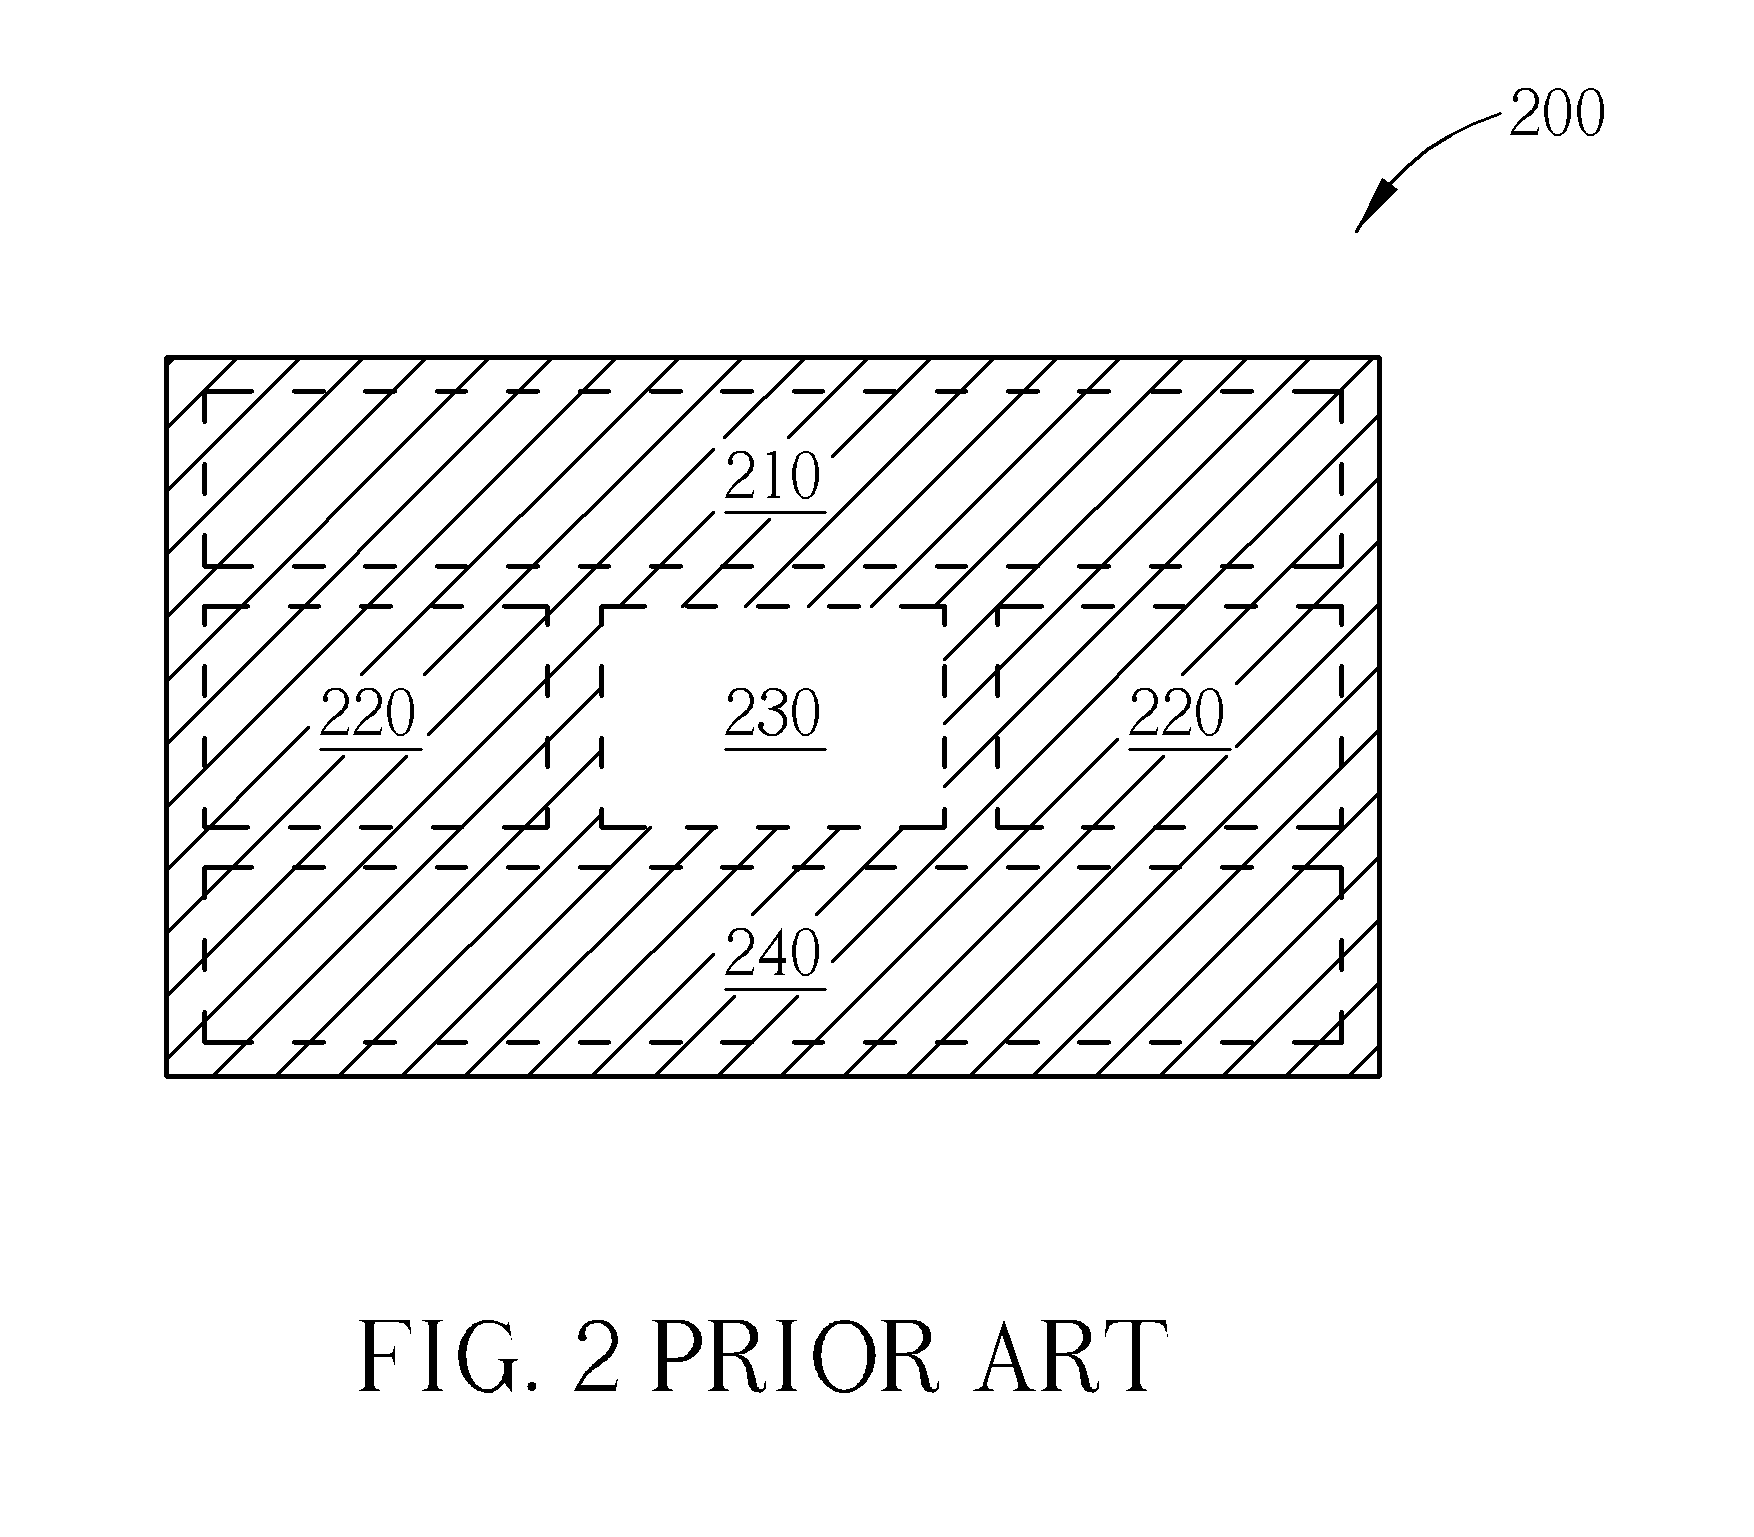 Common-voltage compensation circuit and compensation method for use in a liquid crystal display